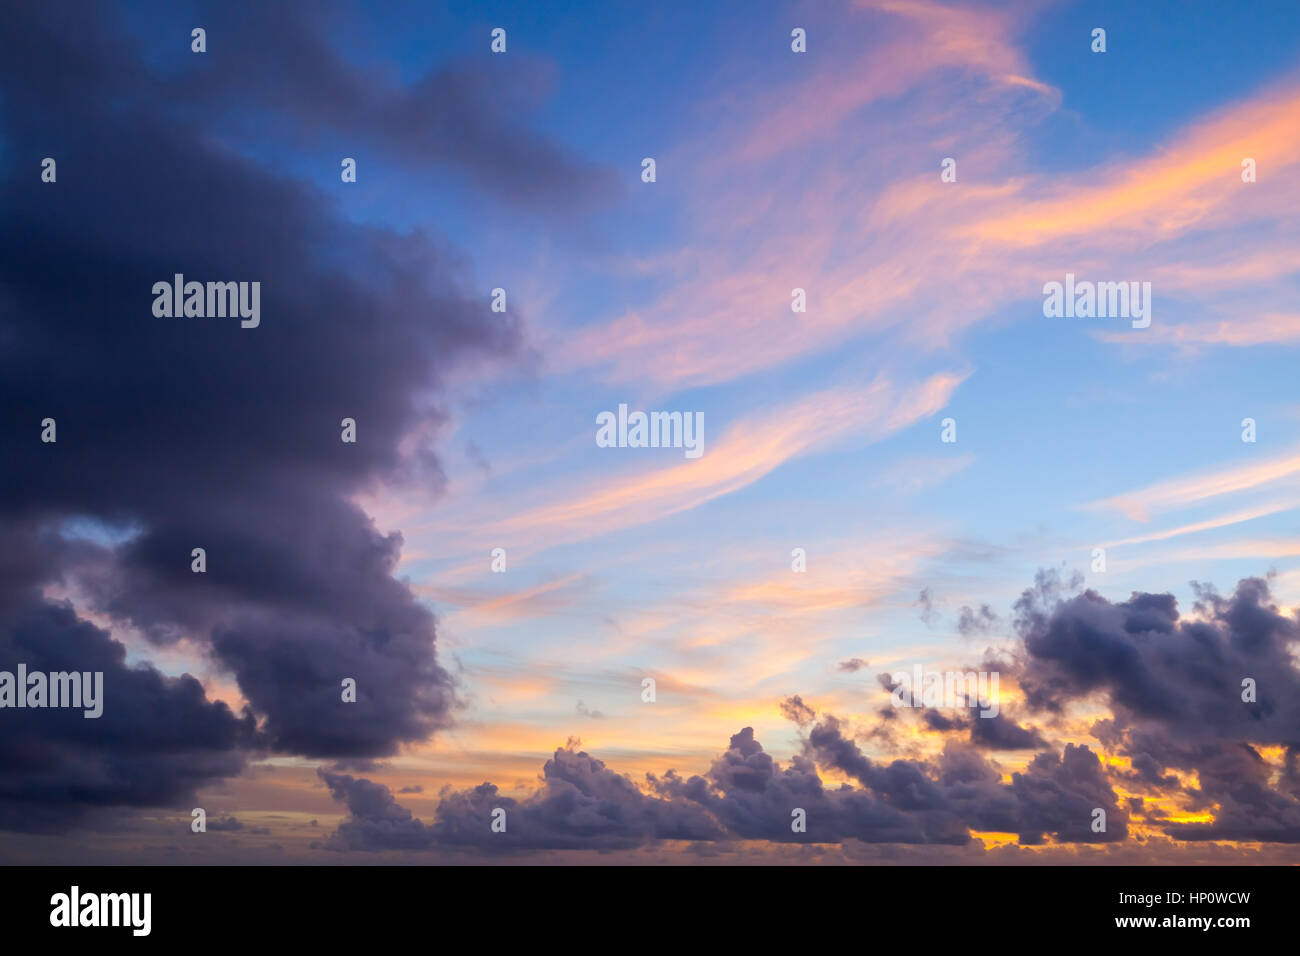 Colorful cloudy background photo with colorful tropical morning sky at sunrise Stock Photo